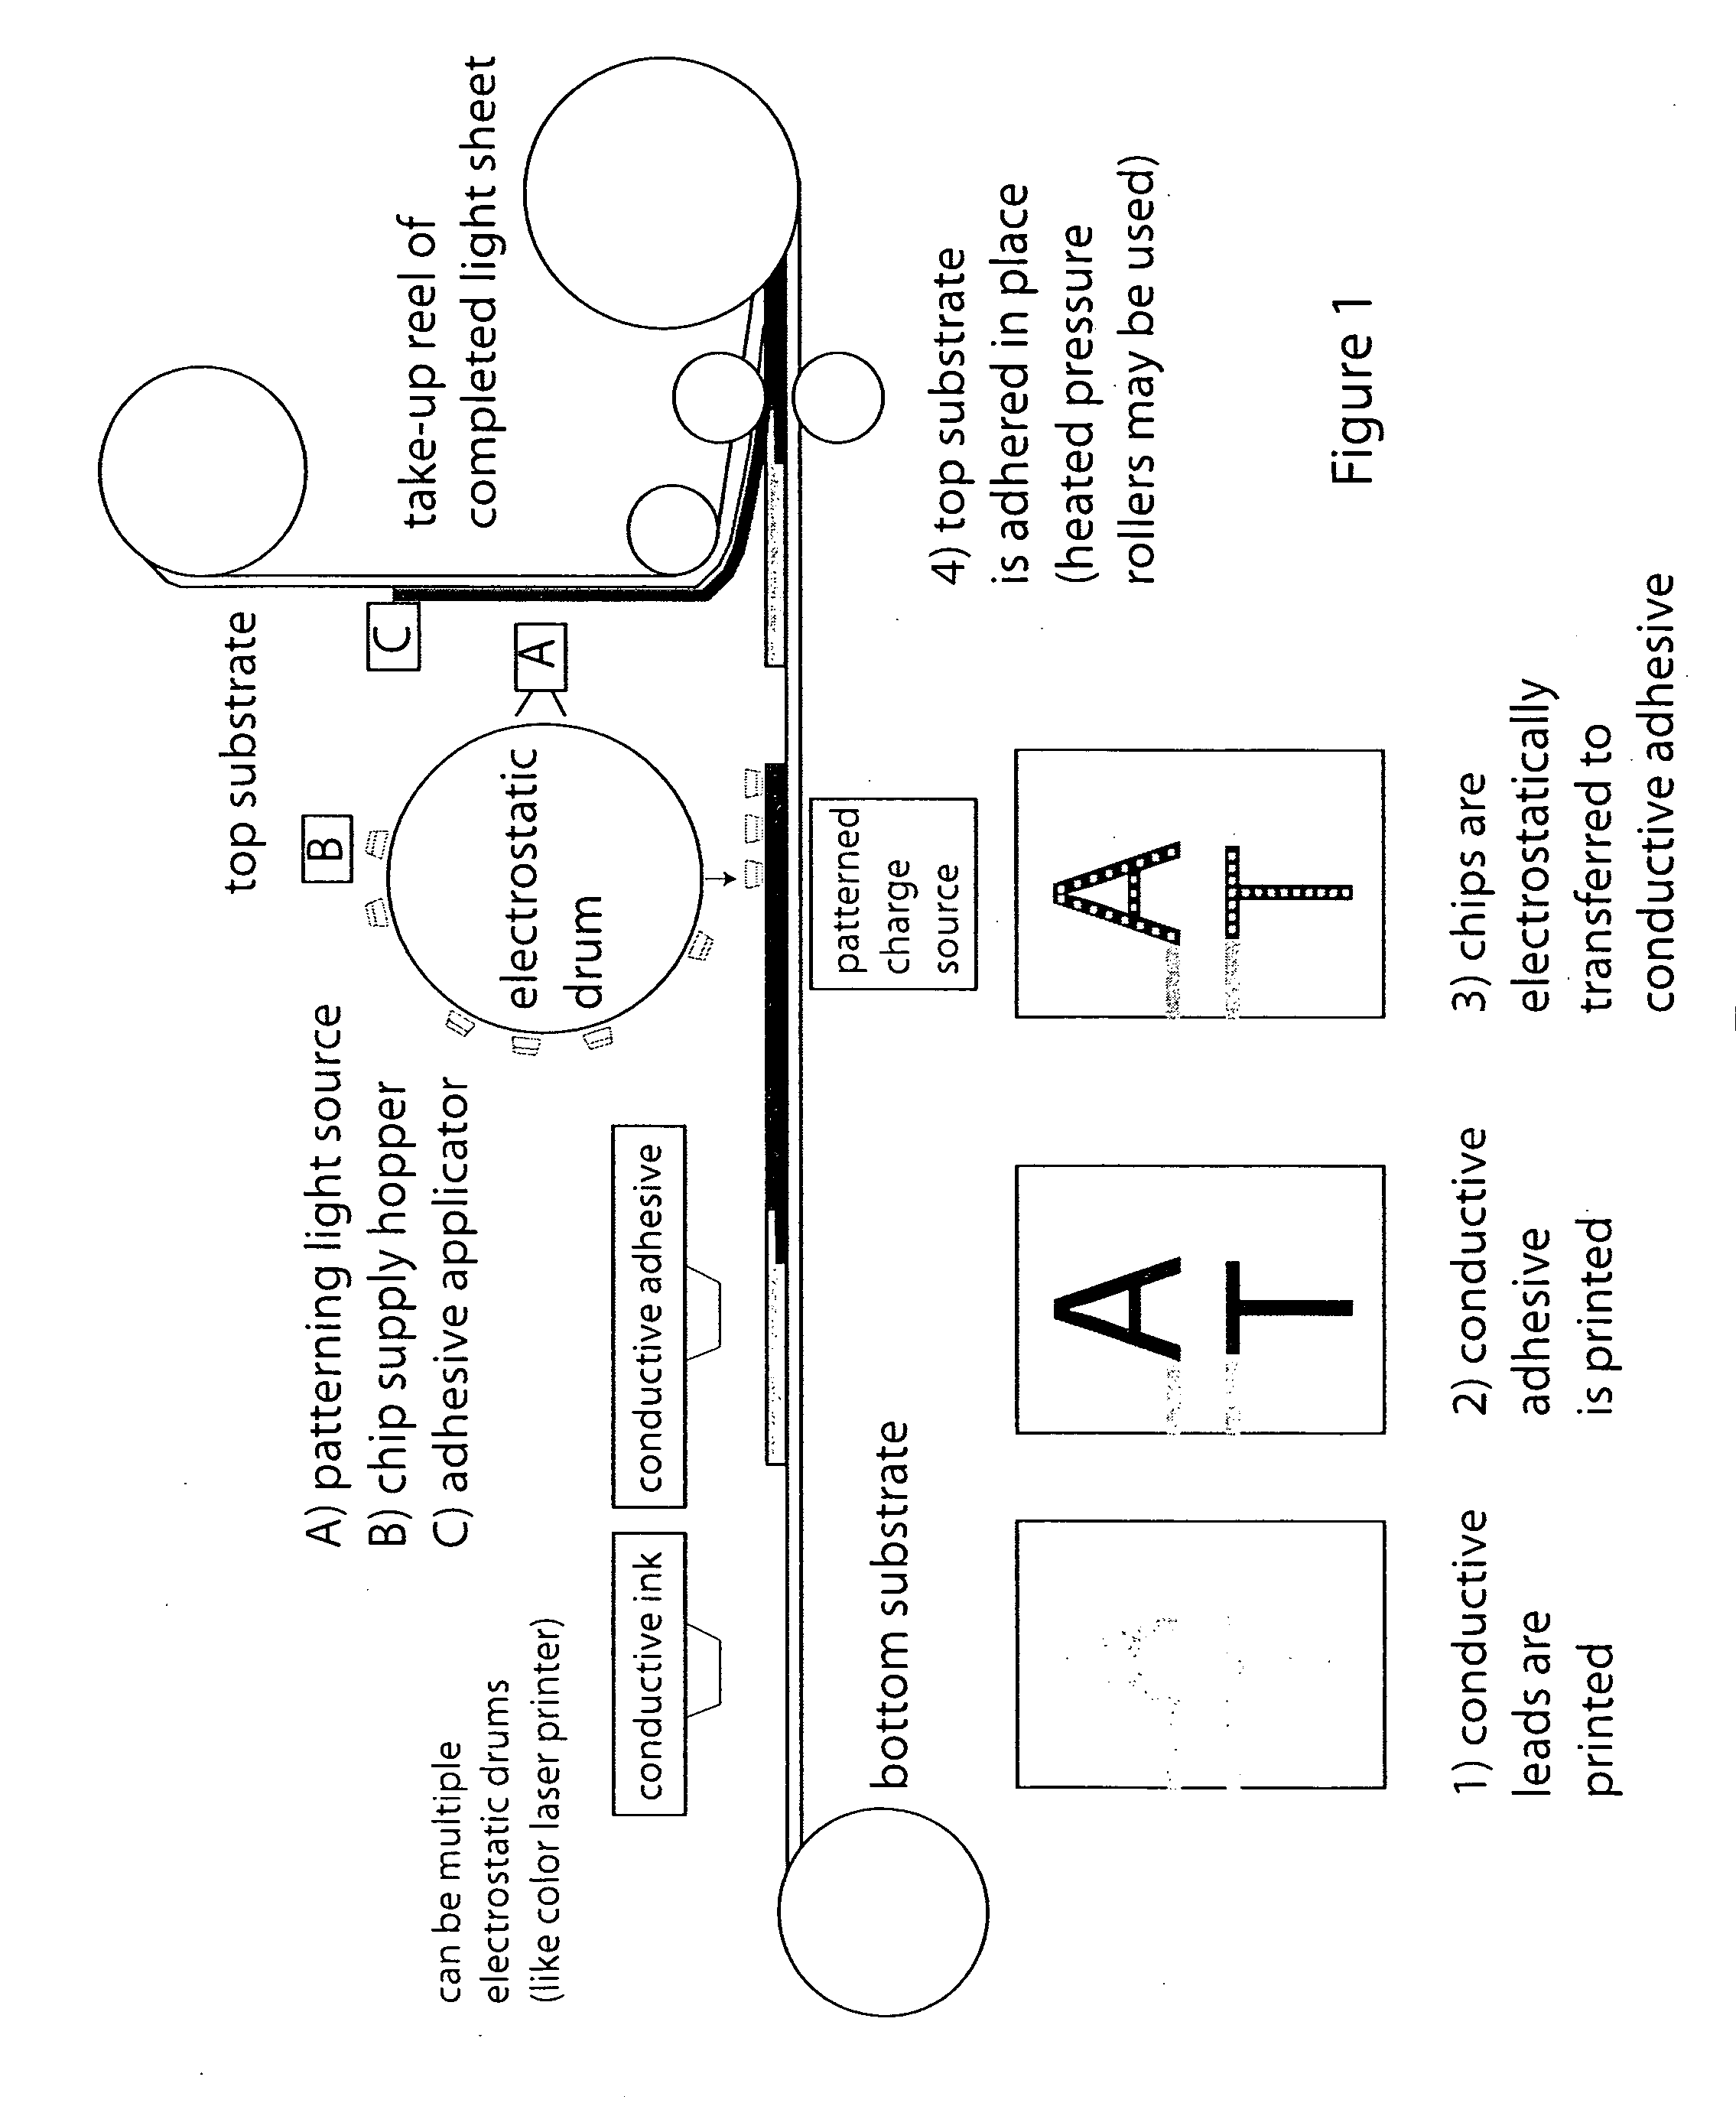 Roll-to-roll fabricated encapsulated semiconductor circuit devices